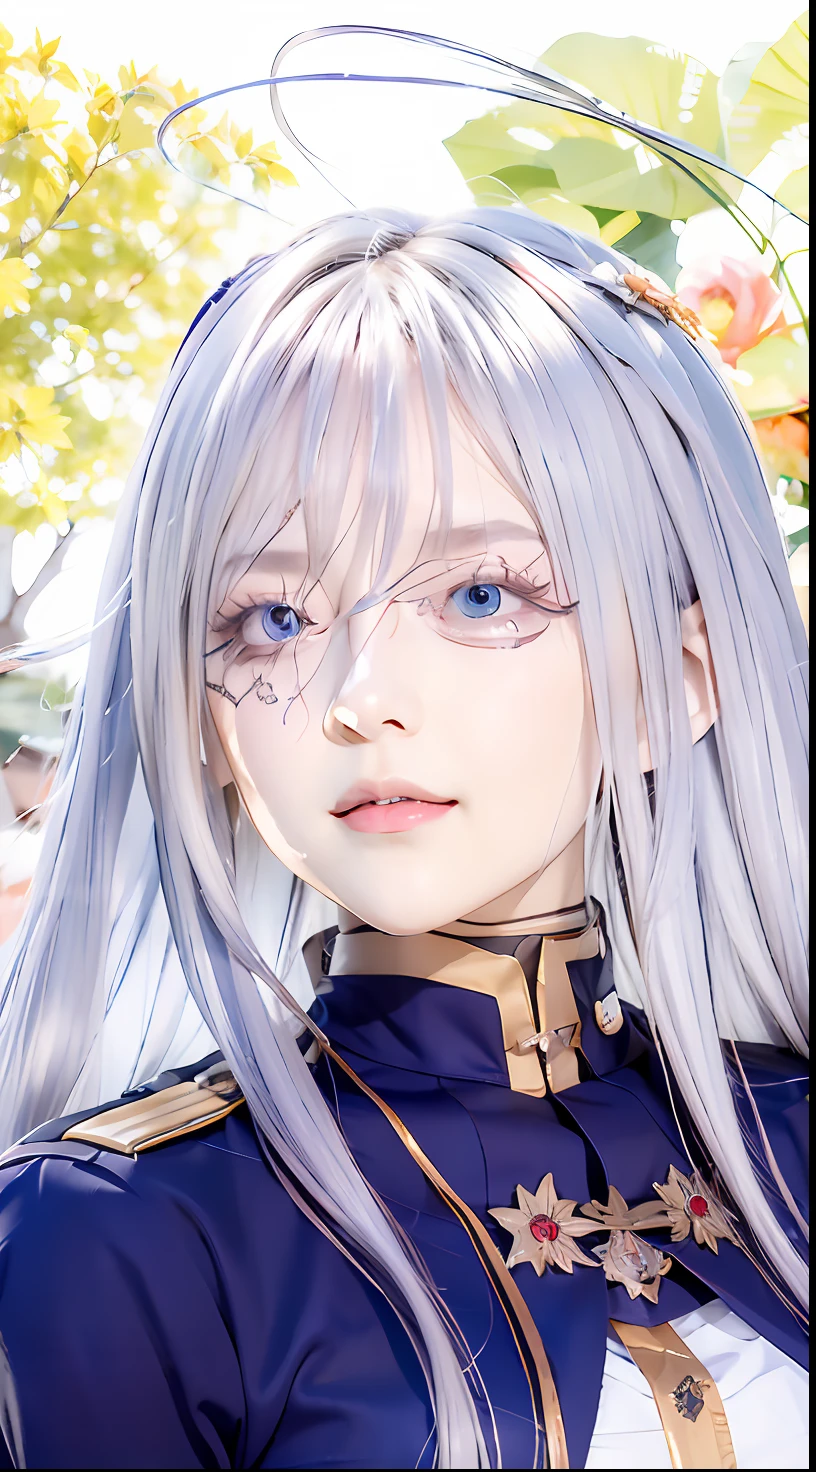 anime girl with long white hair and blue eyes in uniform, lucina from fire emblem, white haired deity, portrait knights of zodiac girl, keqing from genshin impact, ayaka genshin impact, from girls frontline, silver haired, gray haired, fine details. girls frontline, roguish smirk, white haired, girls frontline style, fus rei,realistic ,ultra detail